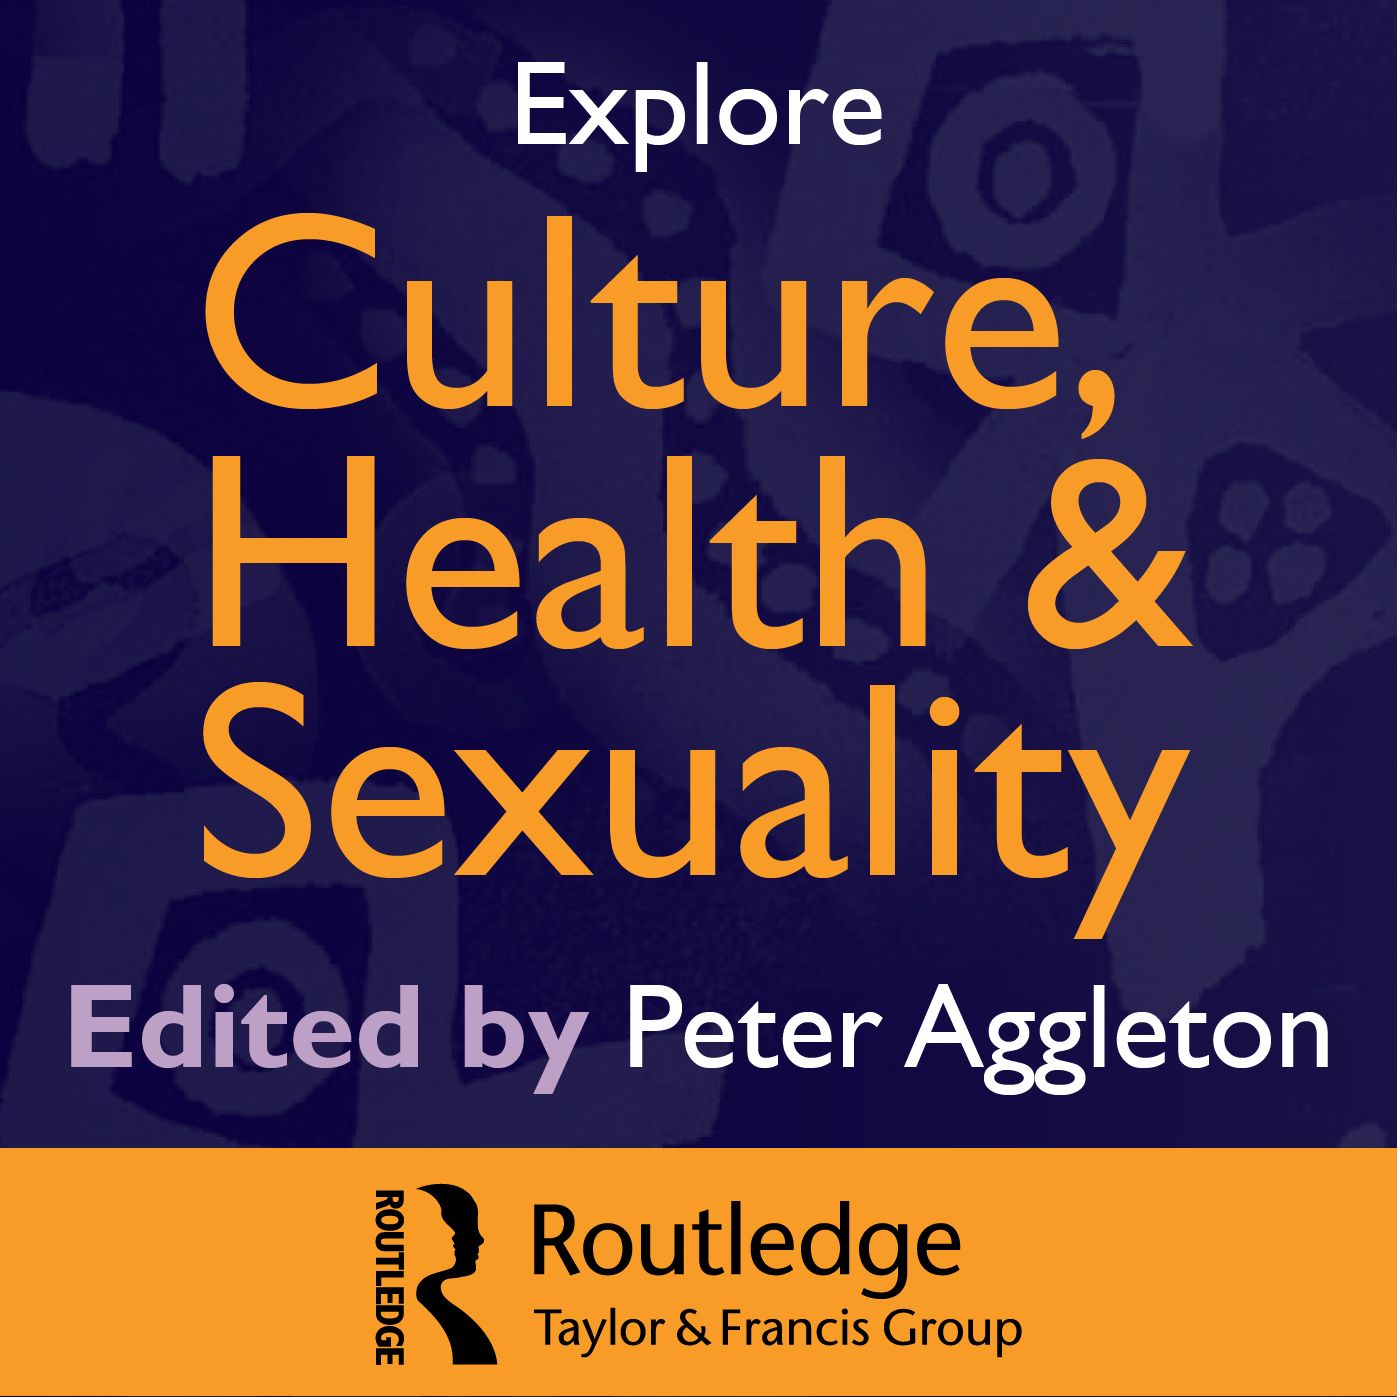 Explore Culture Health & Sexuality. Edited by Peter Aggleton